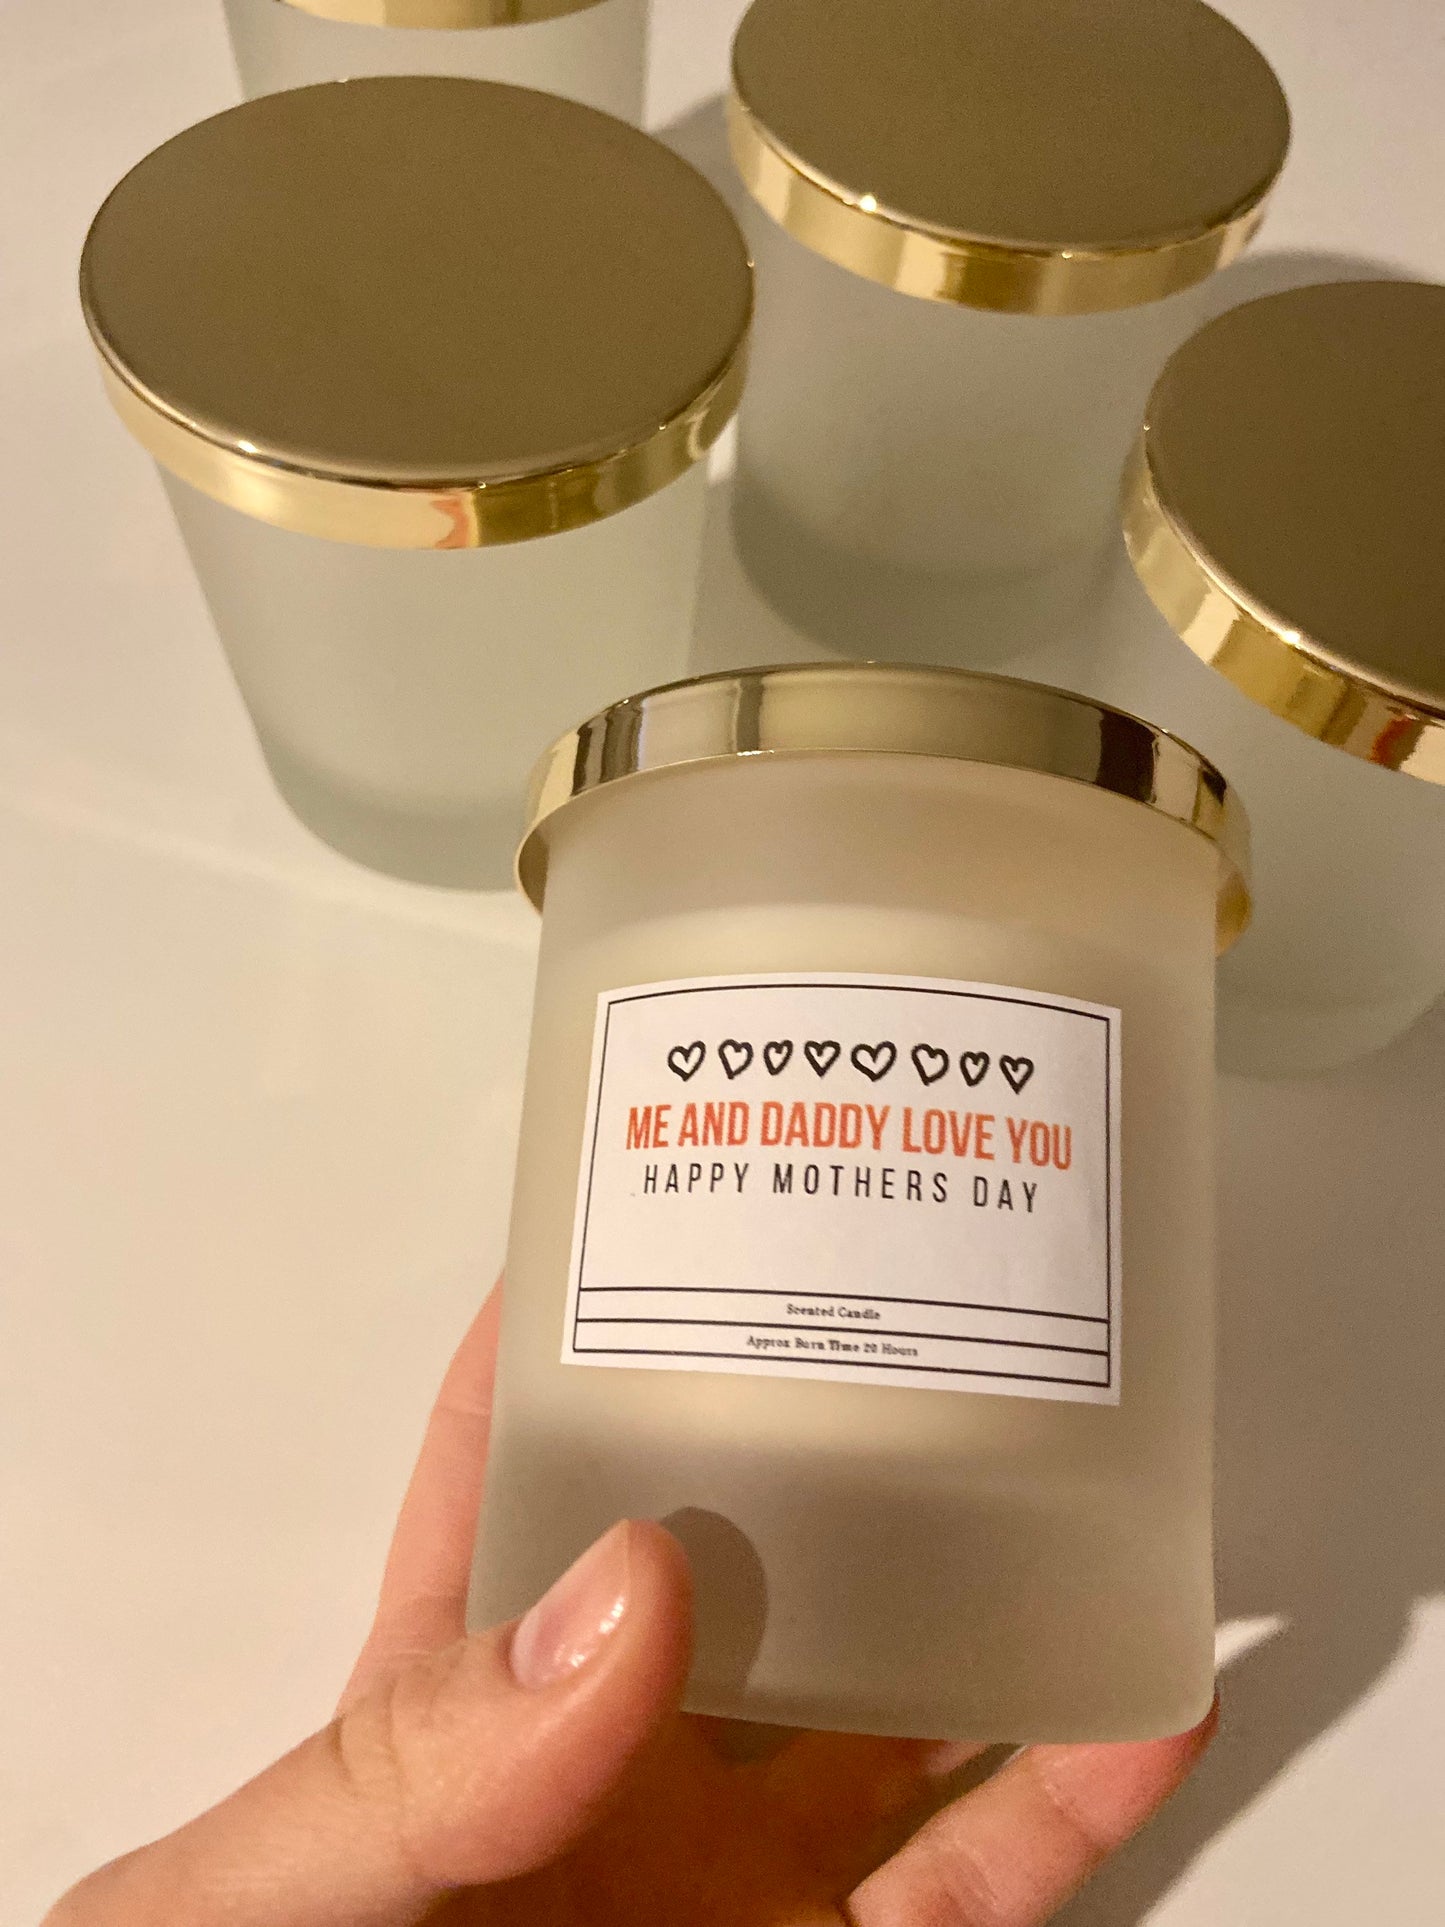 Me And Daddy Love You Mother’s Day Candle/ Mother’s Day Gifts/ Gifts For Mum/ Gifts For Nanny